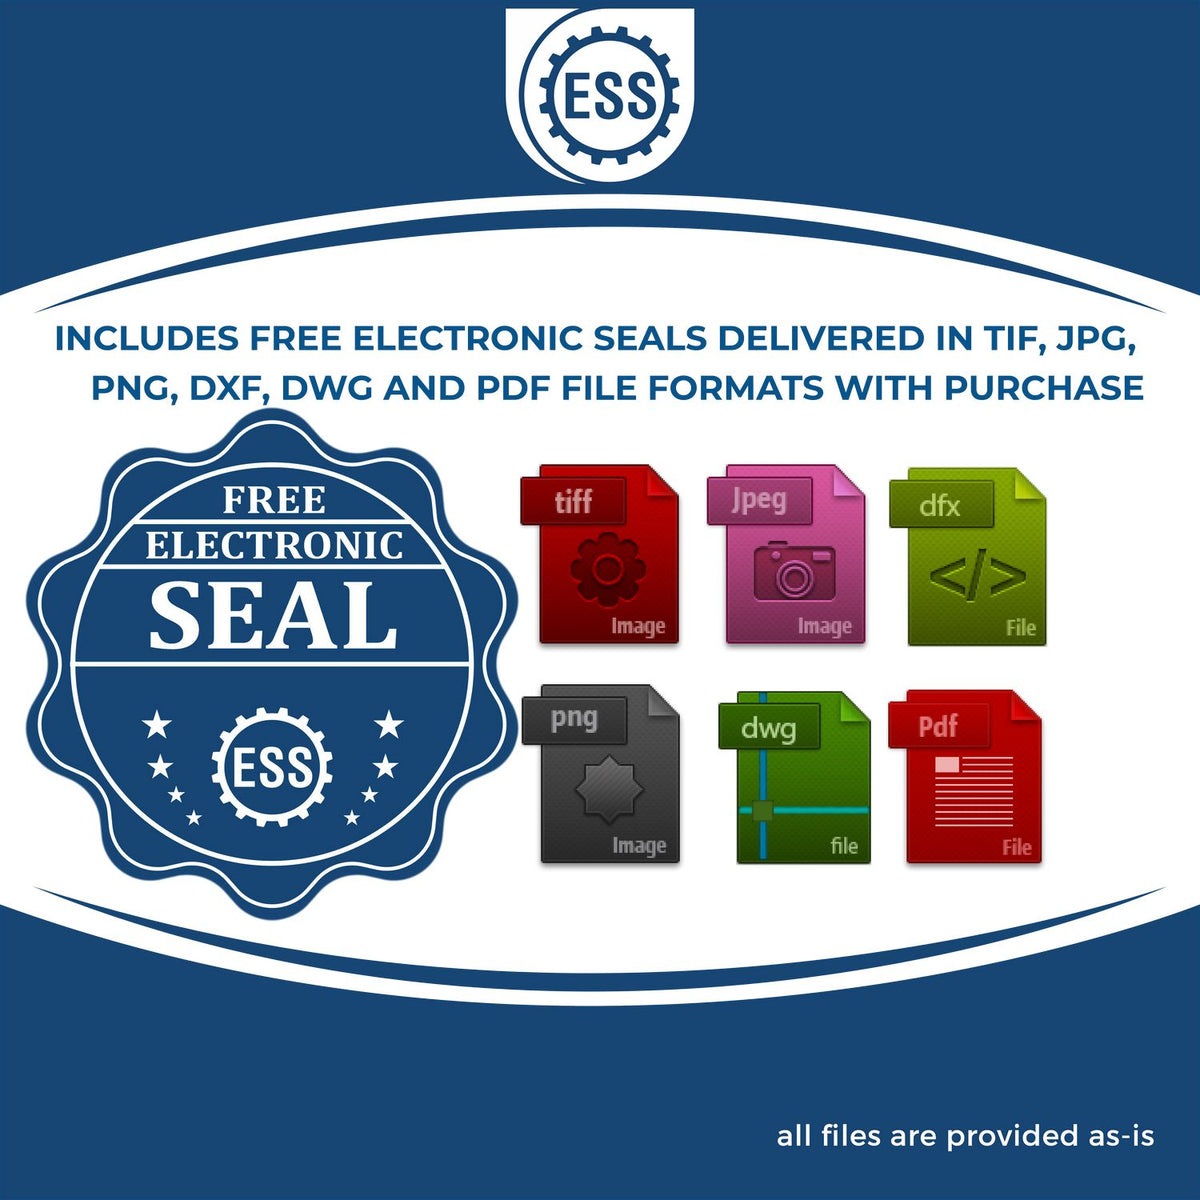 An infographic for the free electronic seal for the PSI Guam Notary Stamp illustrating the different file type icons such as DXF, DWG, TIF, JPG and PNG.